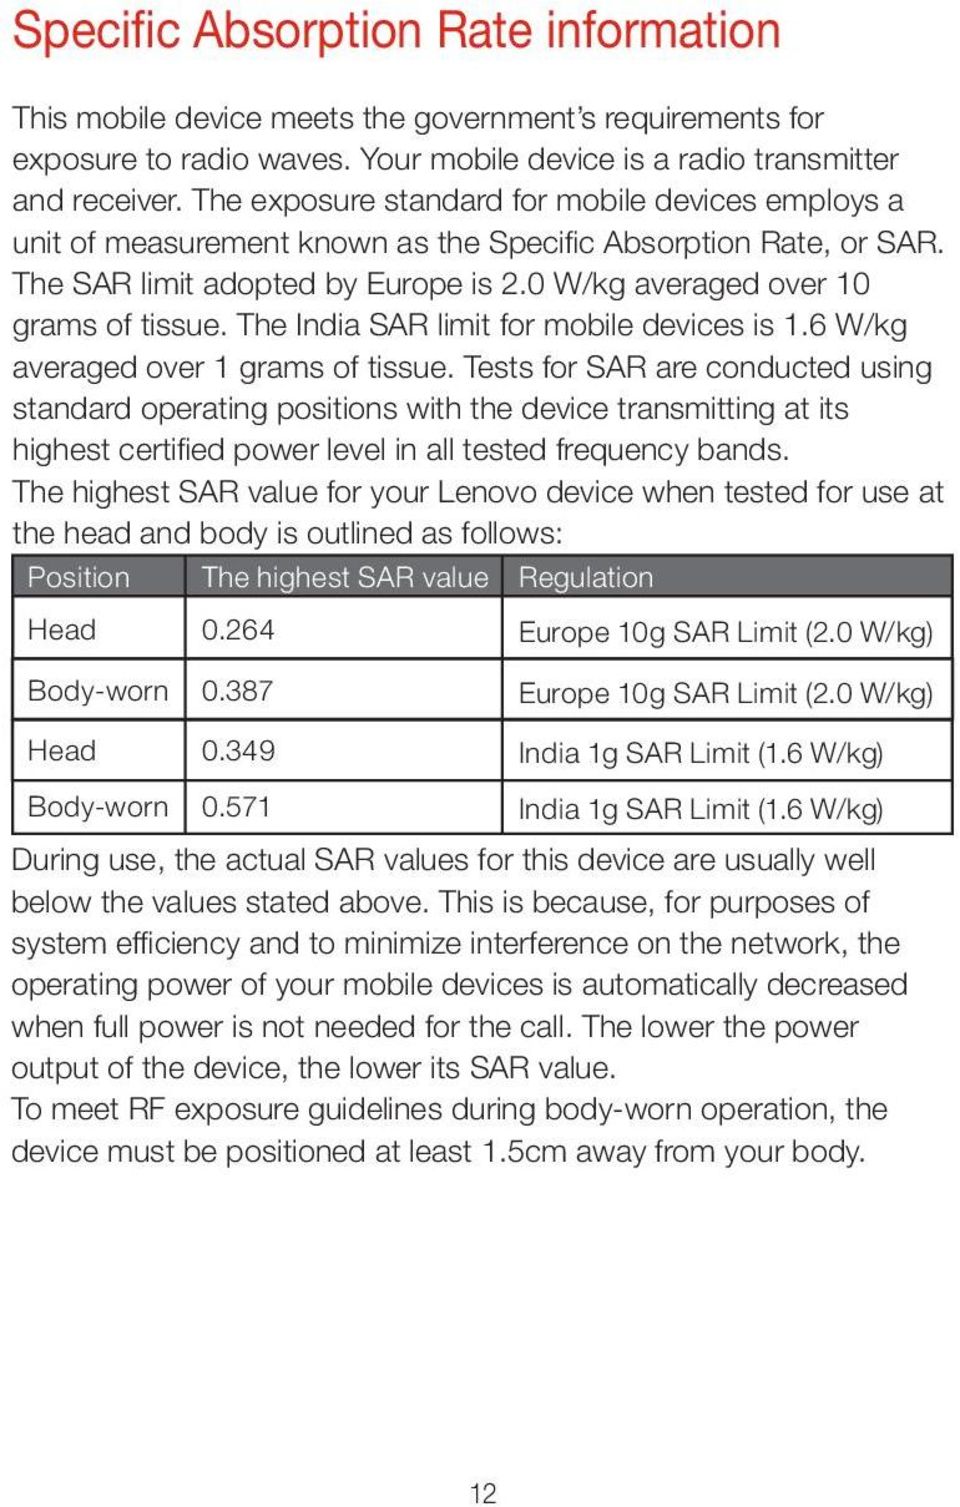 The India SAR limit for mobile devices is 1.6 W/kg averaged over 1 grams of tissue.